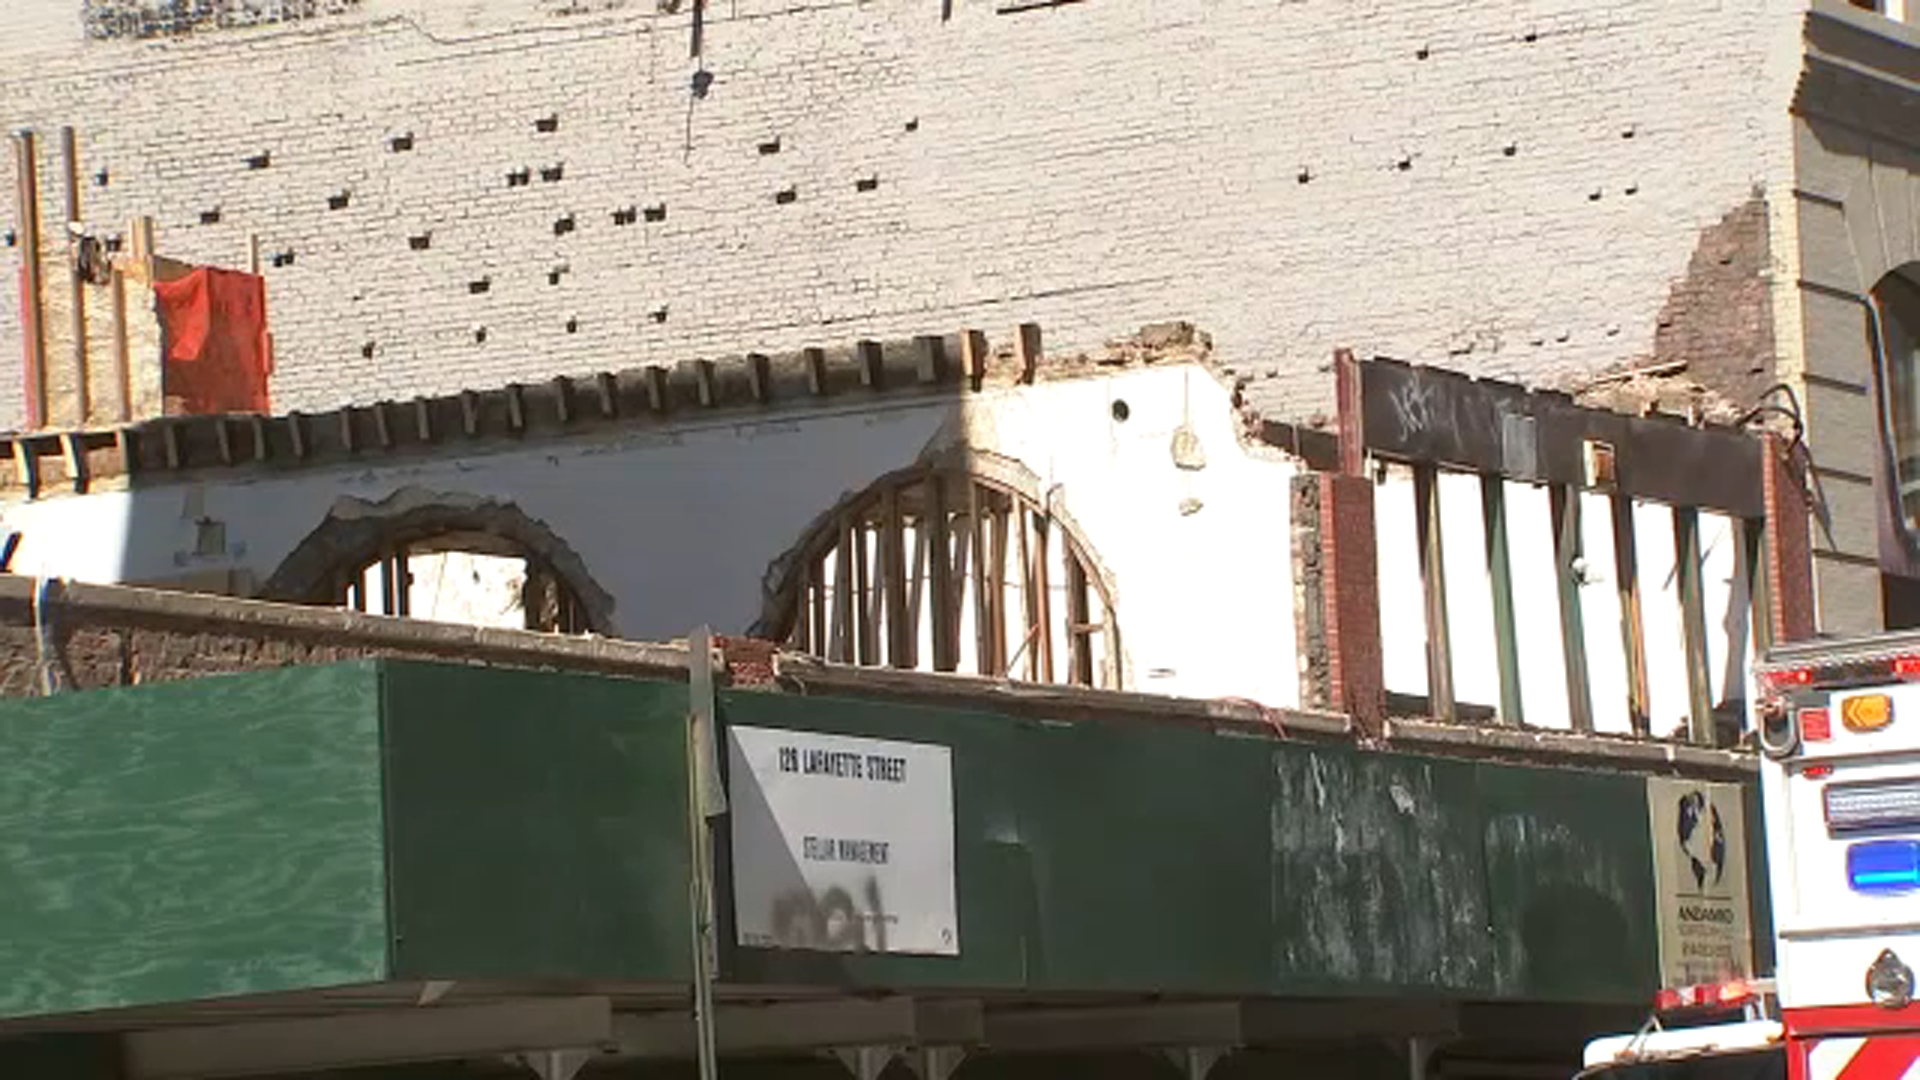 Wall collapses during building demolition in Lower Manhattan; 3 injured